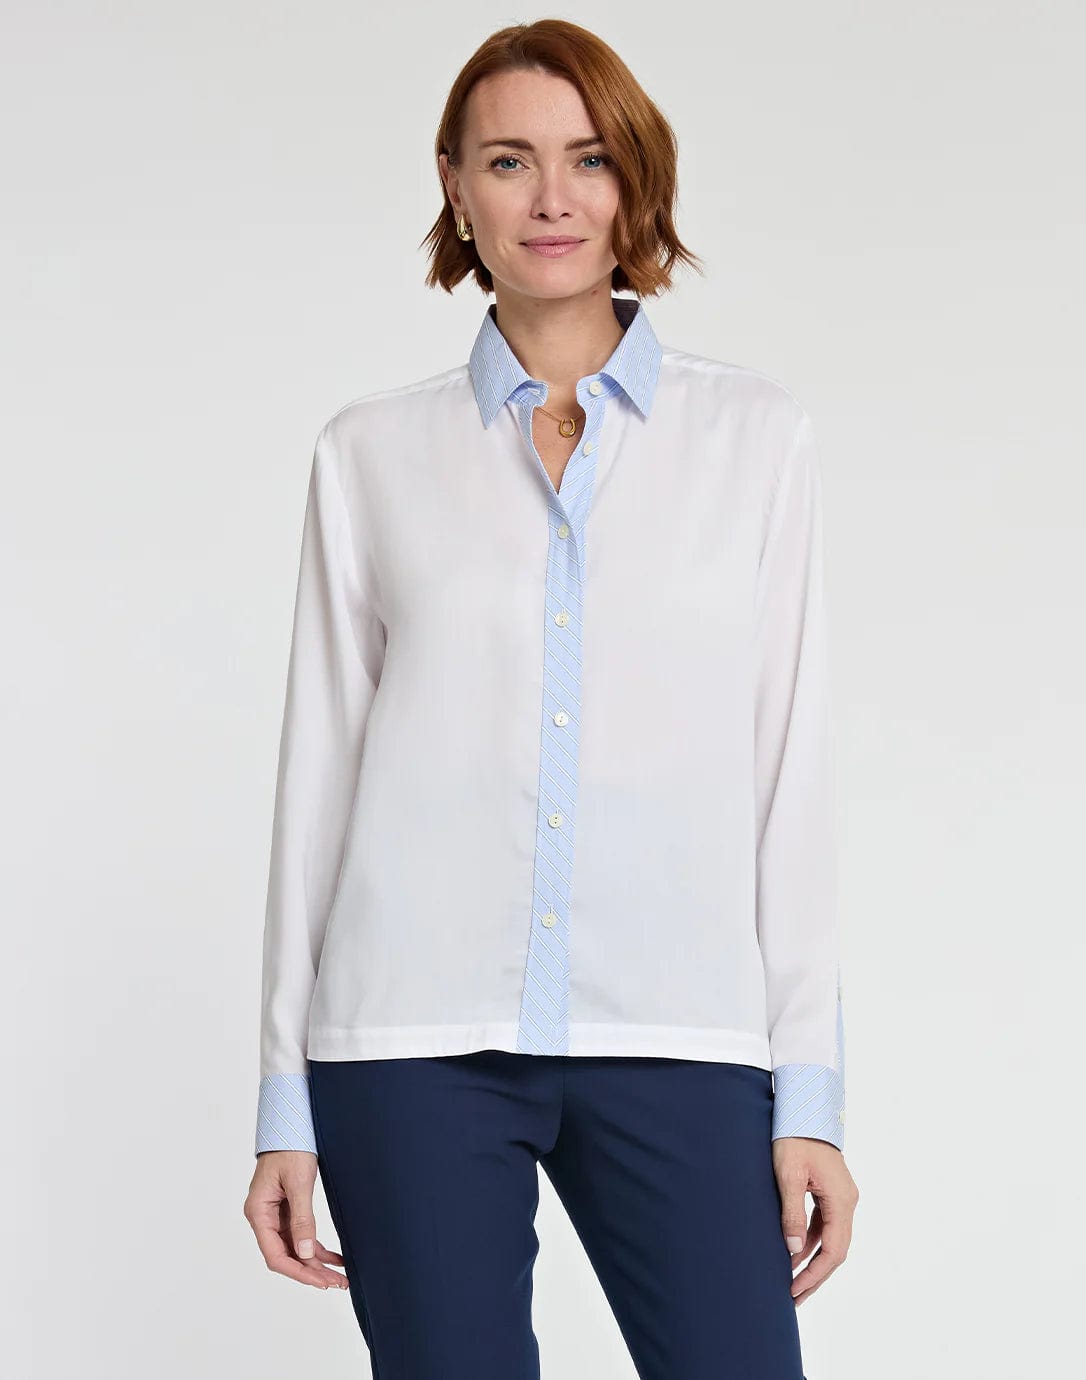 Women's Tops from Hinson Wu, Finley, Planet, & More – Planters Exchange